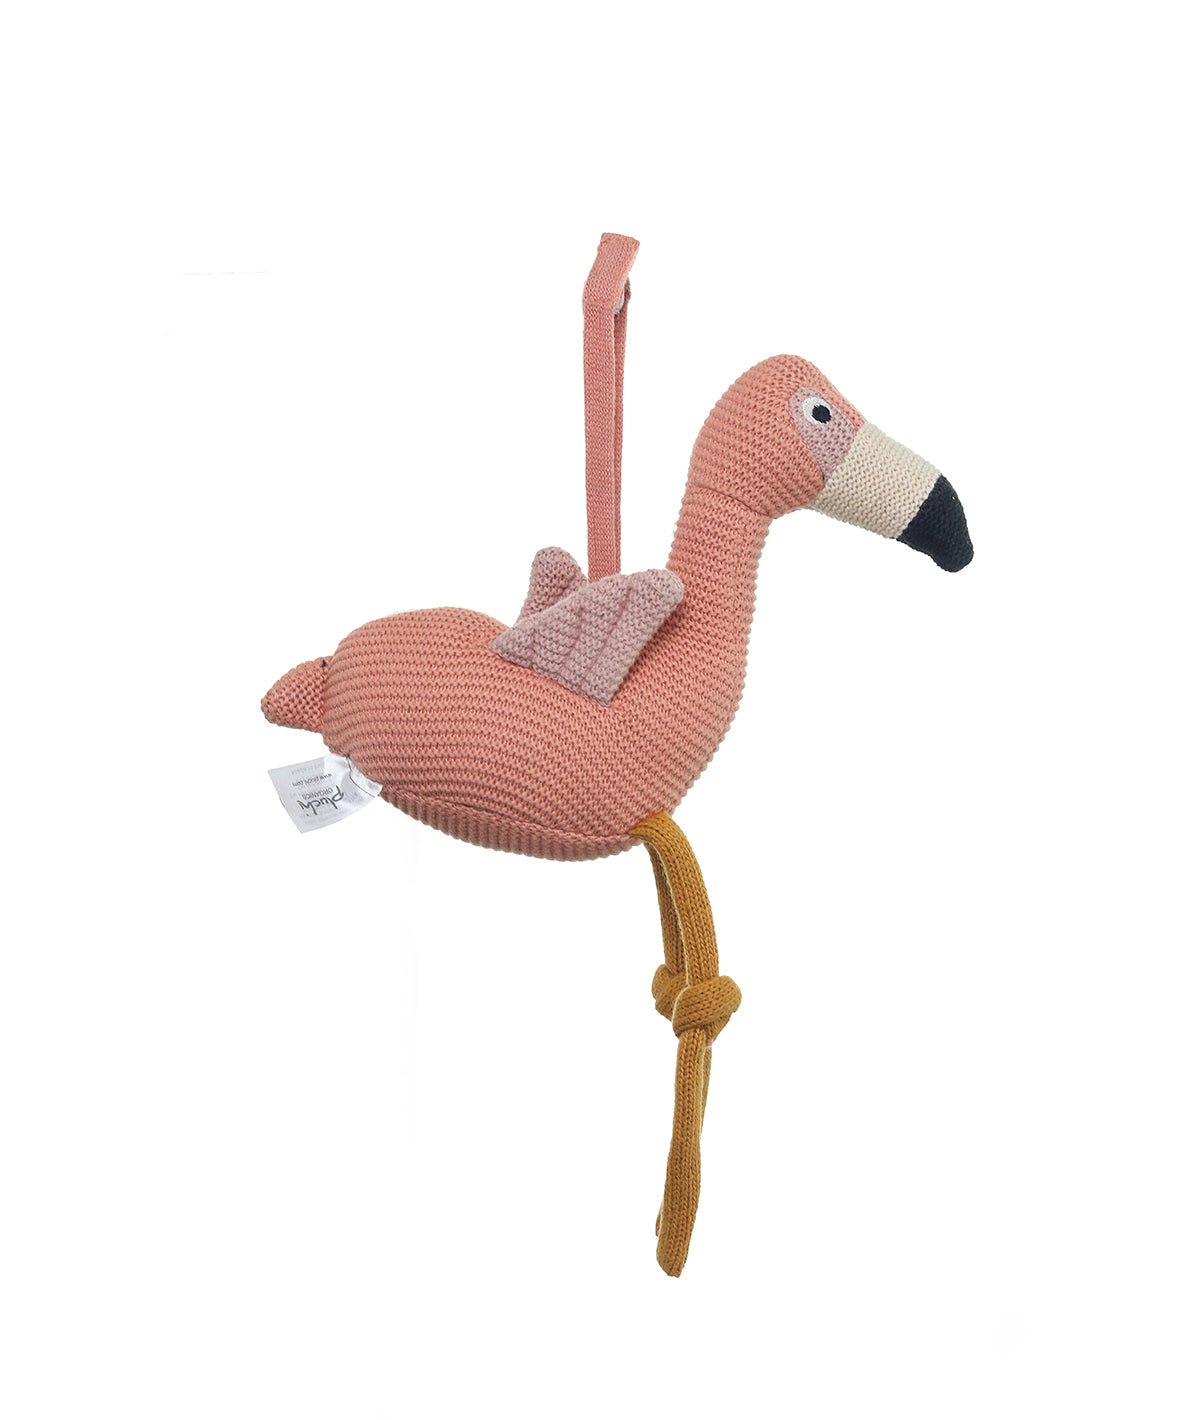 Flamingo Cotton Knitted Stuffed Soft Toy (Coral)